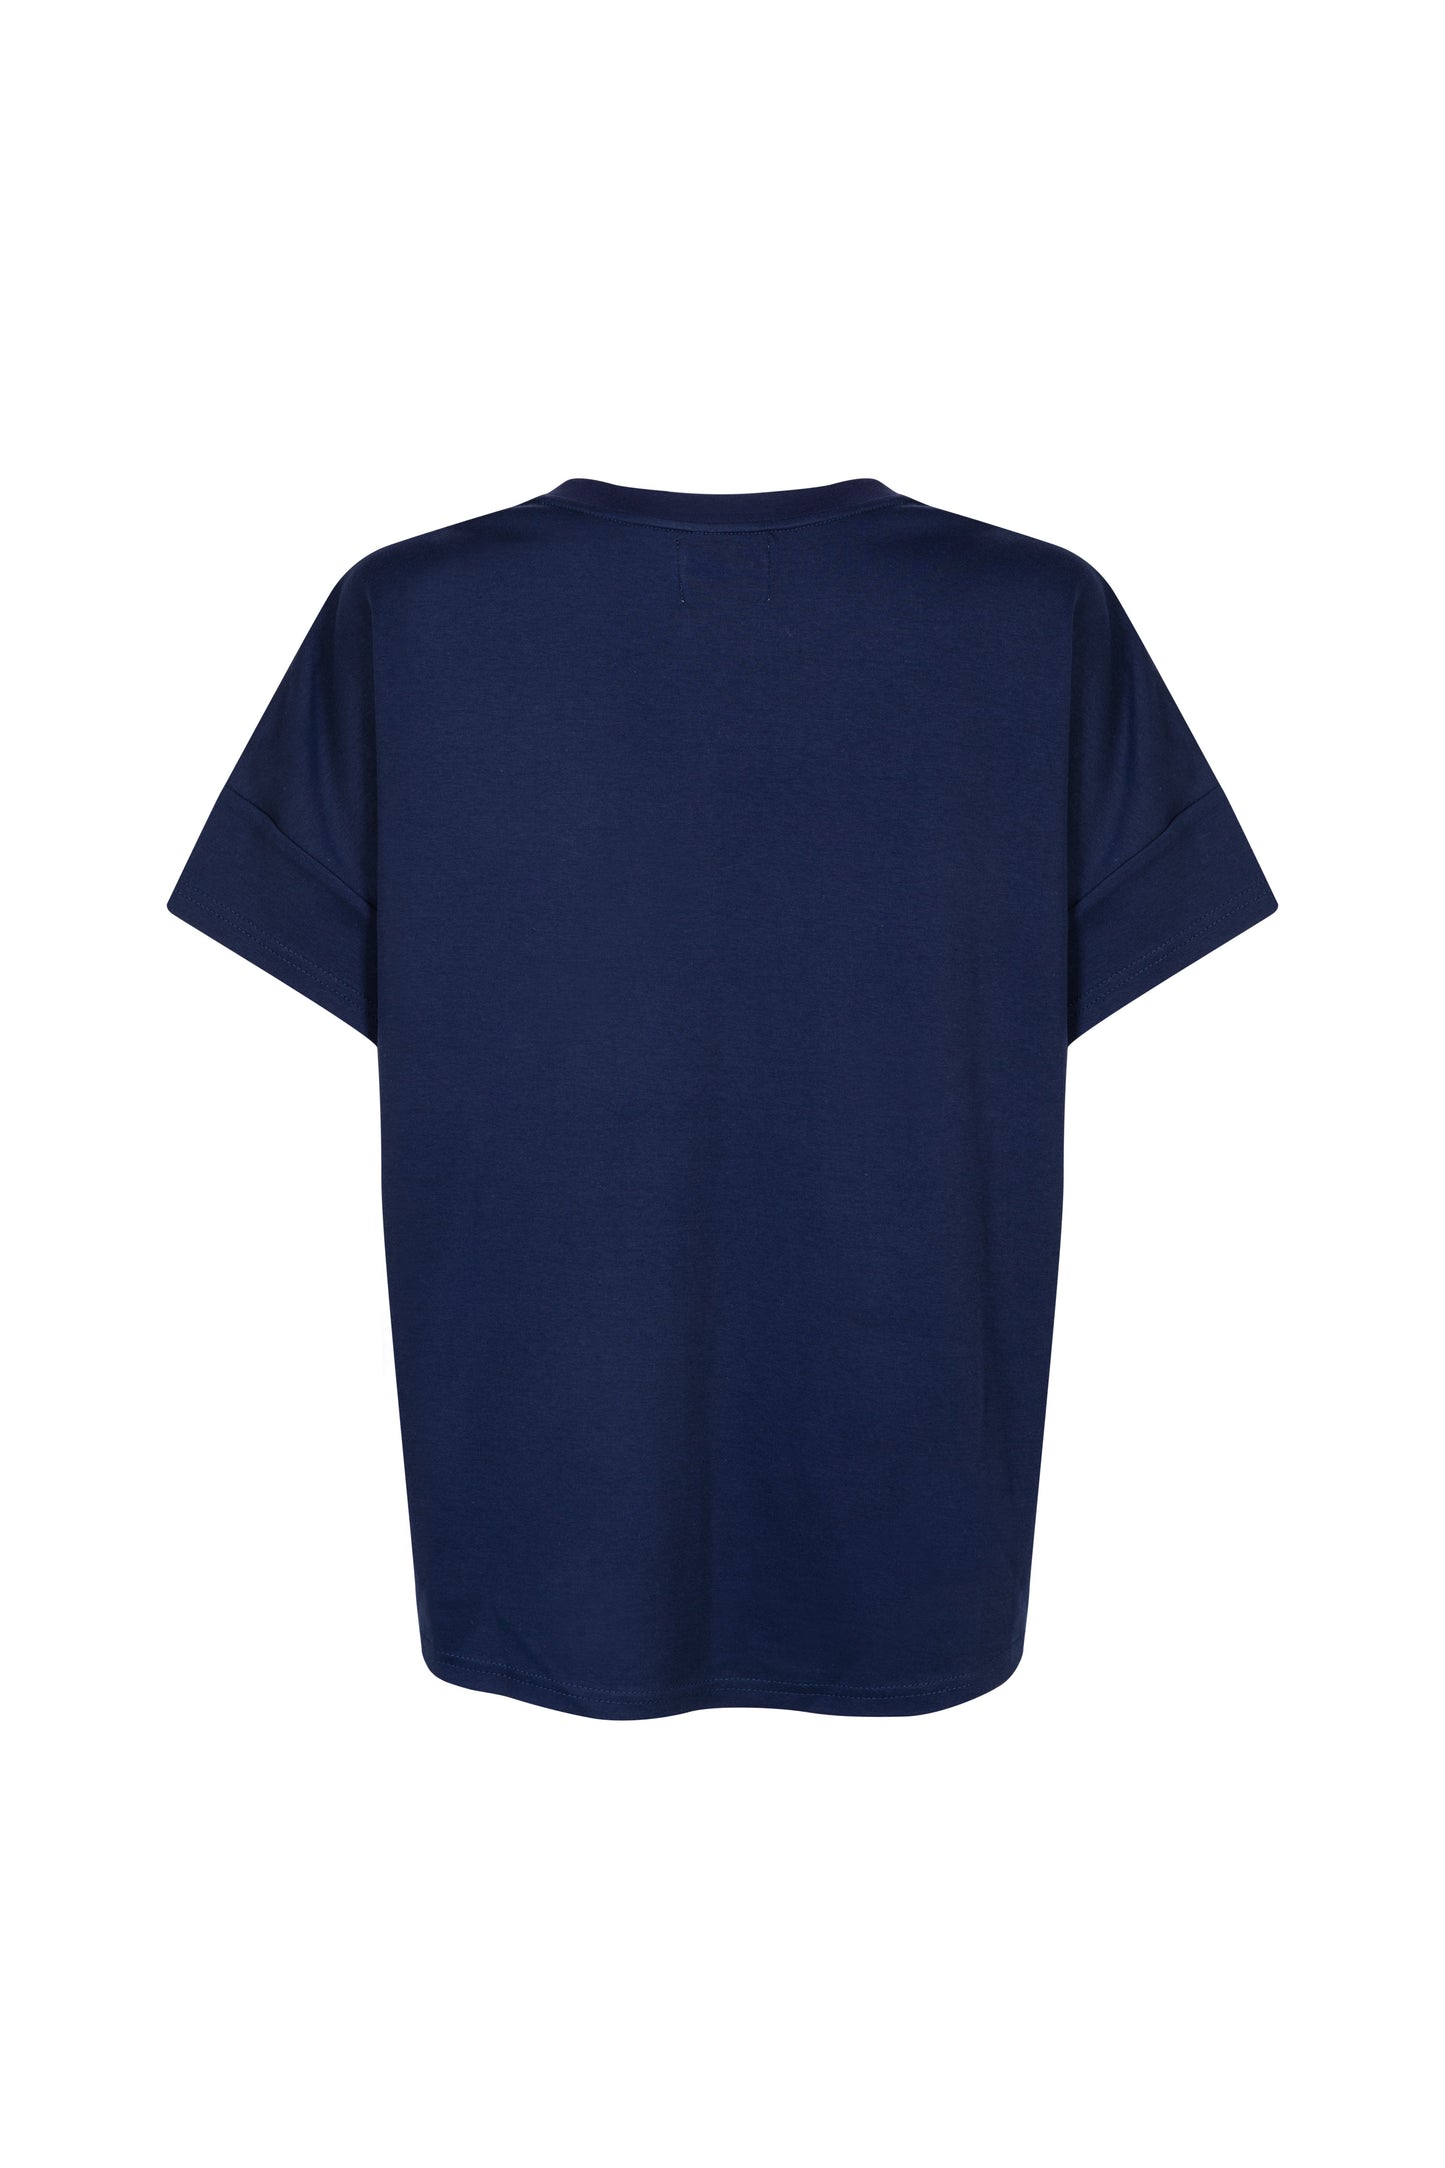 'SIS' SIGNATURE EMBROIDERED T SHIRT - NAVY